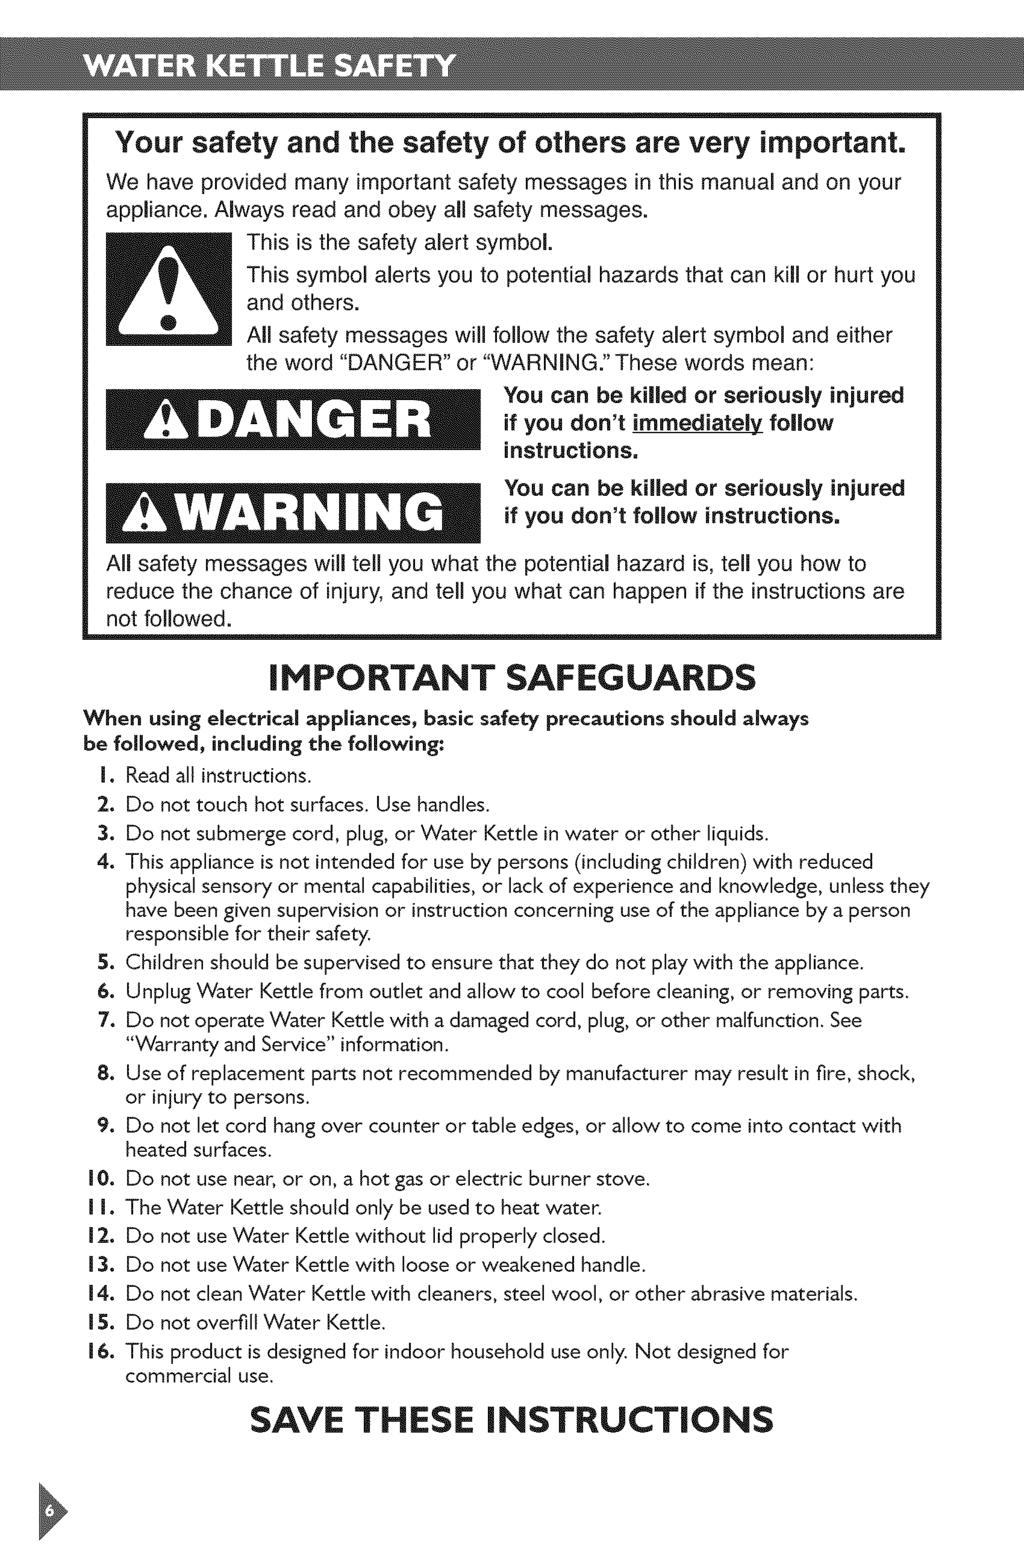 Your safety and the safety of others are very important. We have provided many important safety messages in this manual and on your appliance. Always read and obey all safety messages.